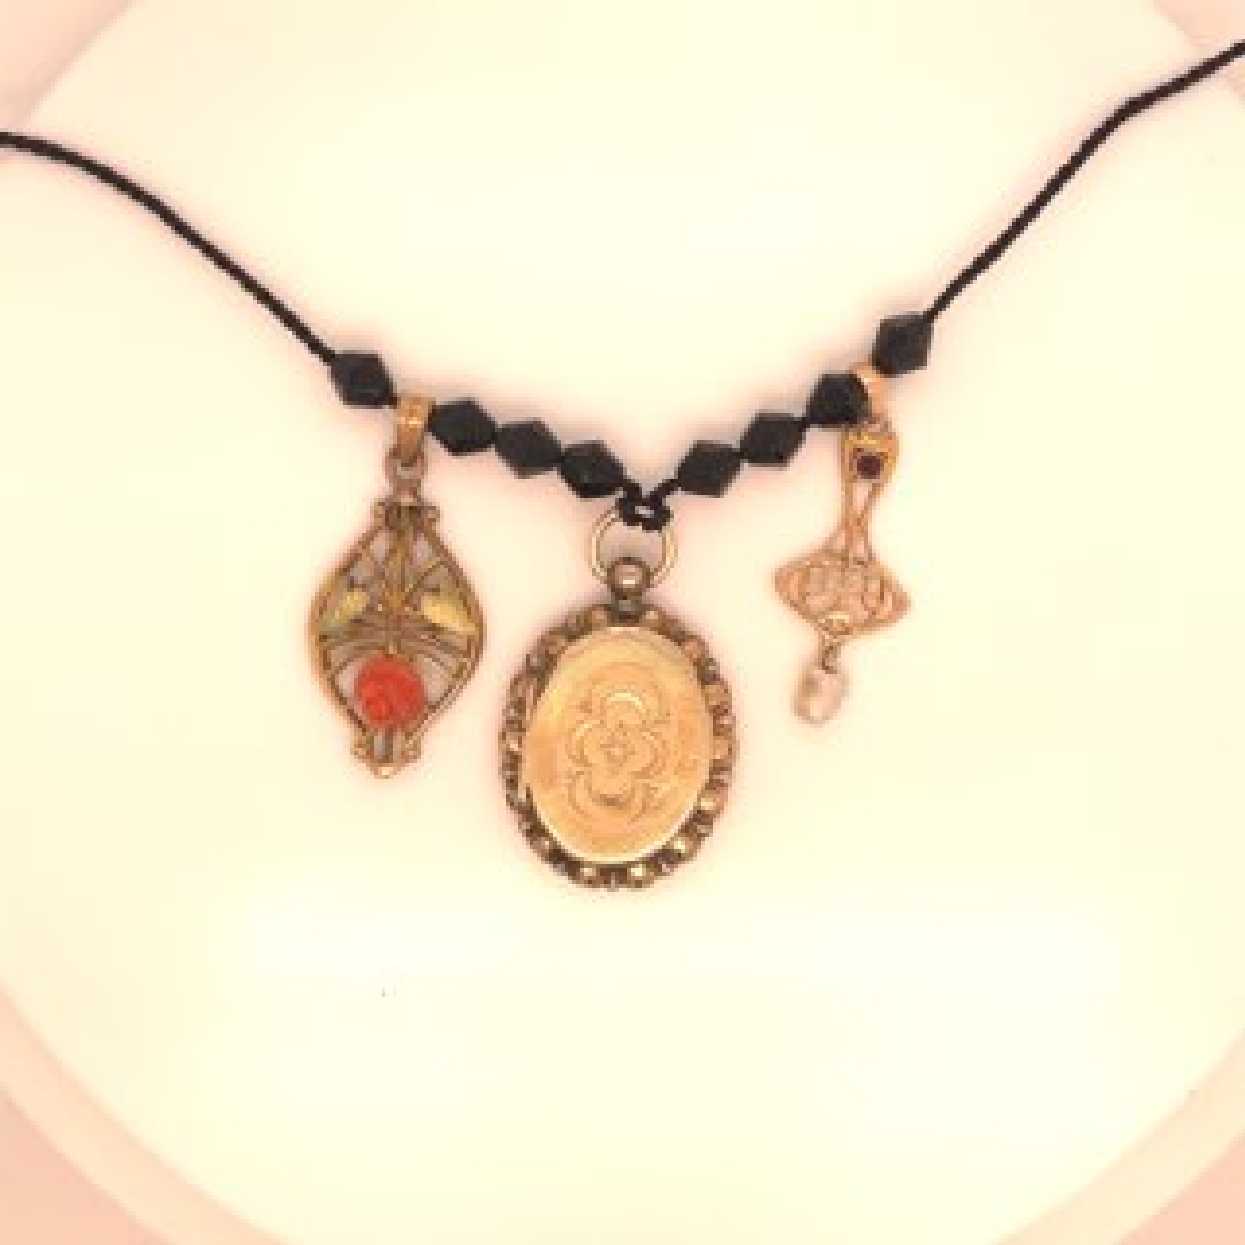 Victorian/Art Nouveau Assemblage/Morning Necklace. One Gold Filled Coral Floral Pendant; One 10K Amethyst and Pearl Pendant; One Gold Filled Morning Locket on Black Silk Cord with Jet Beads

Side Pendants Could be Seperated from Necklace and Sold Separatly. Contact for More Information.

Length: 20 Inches